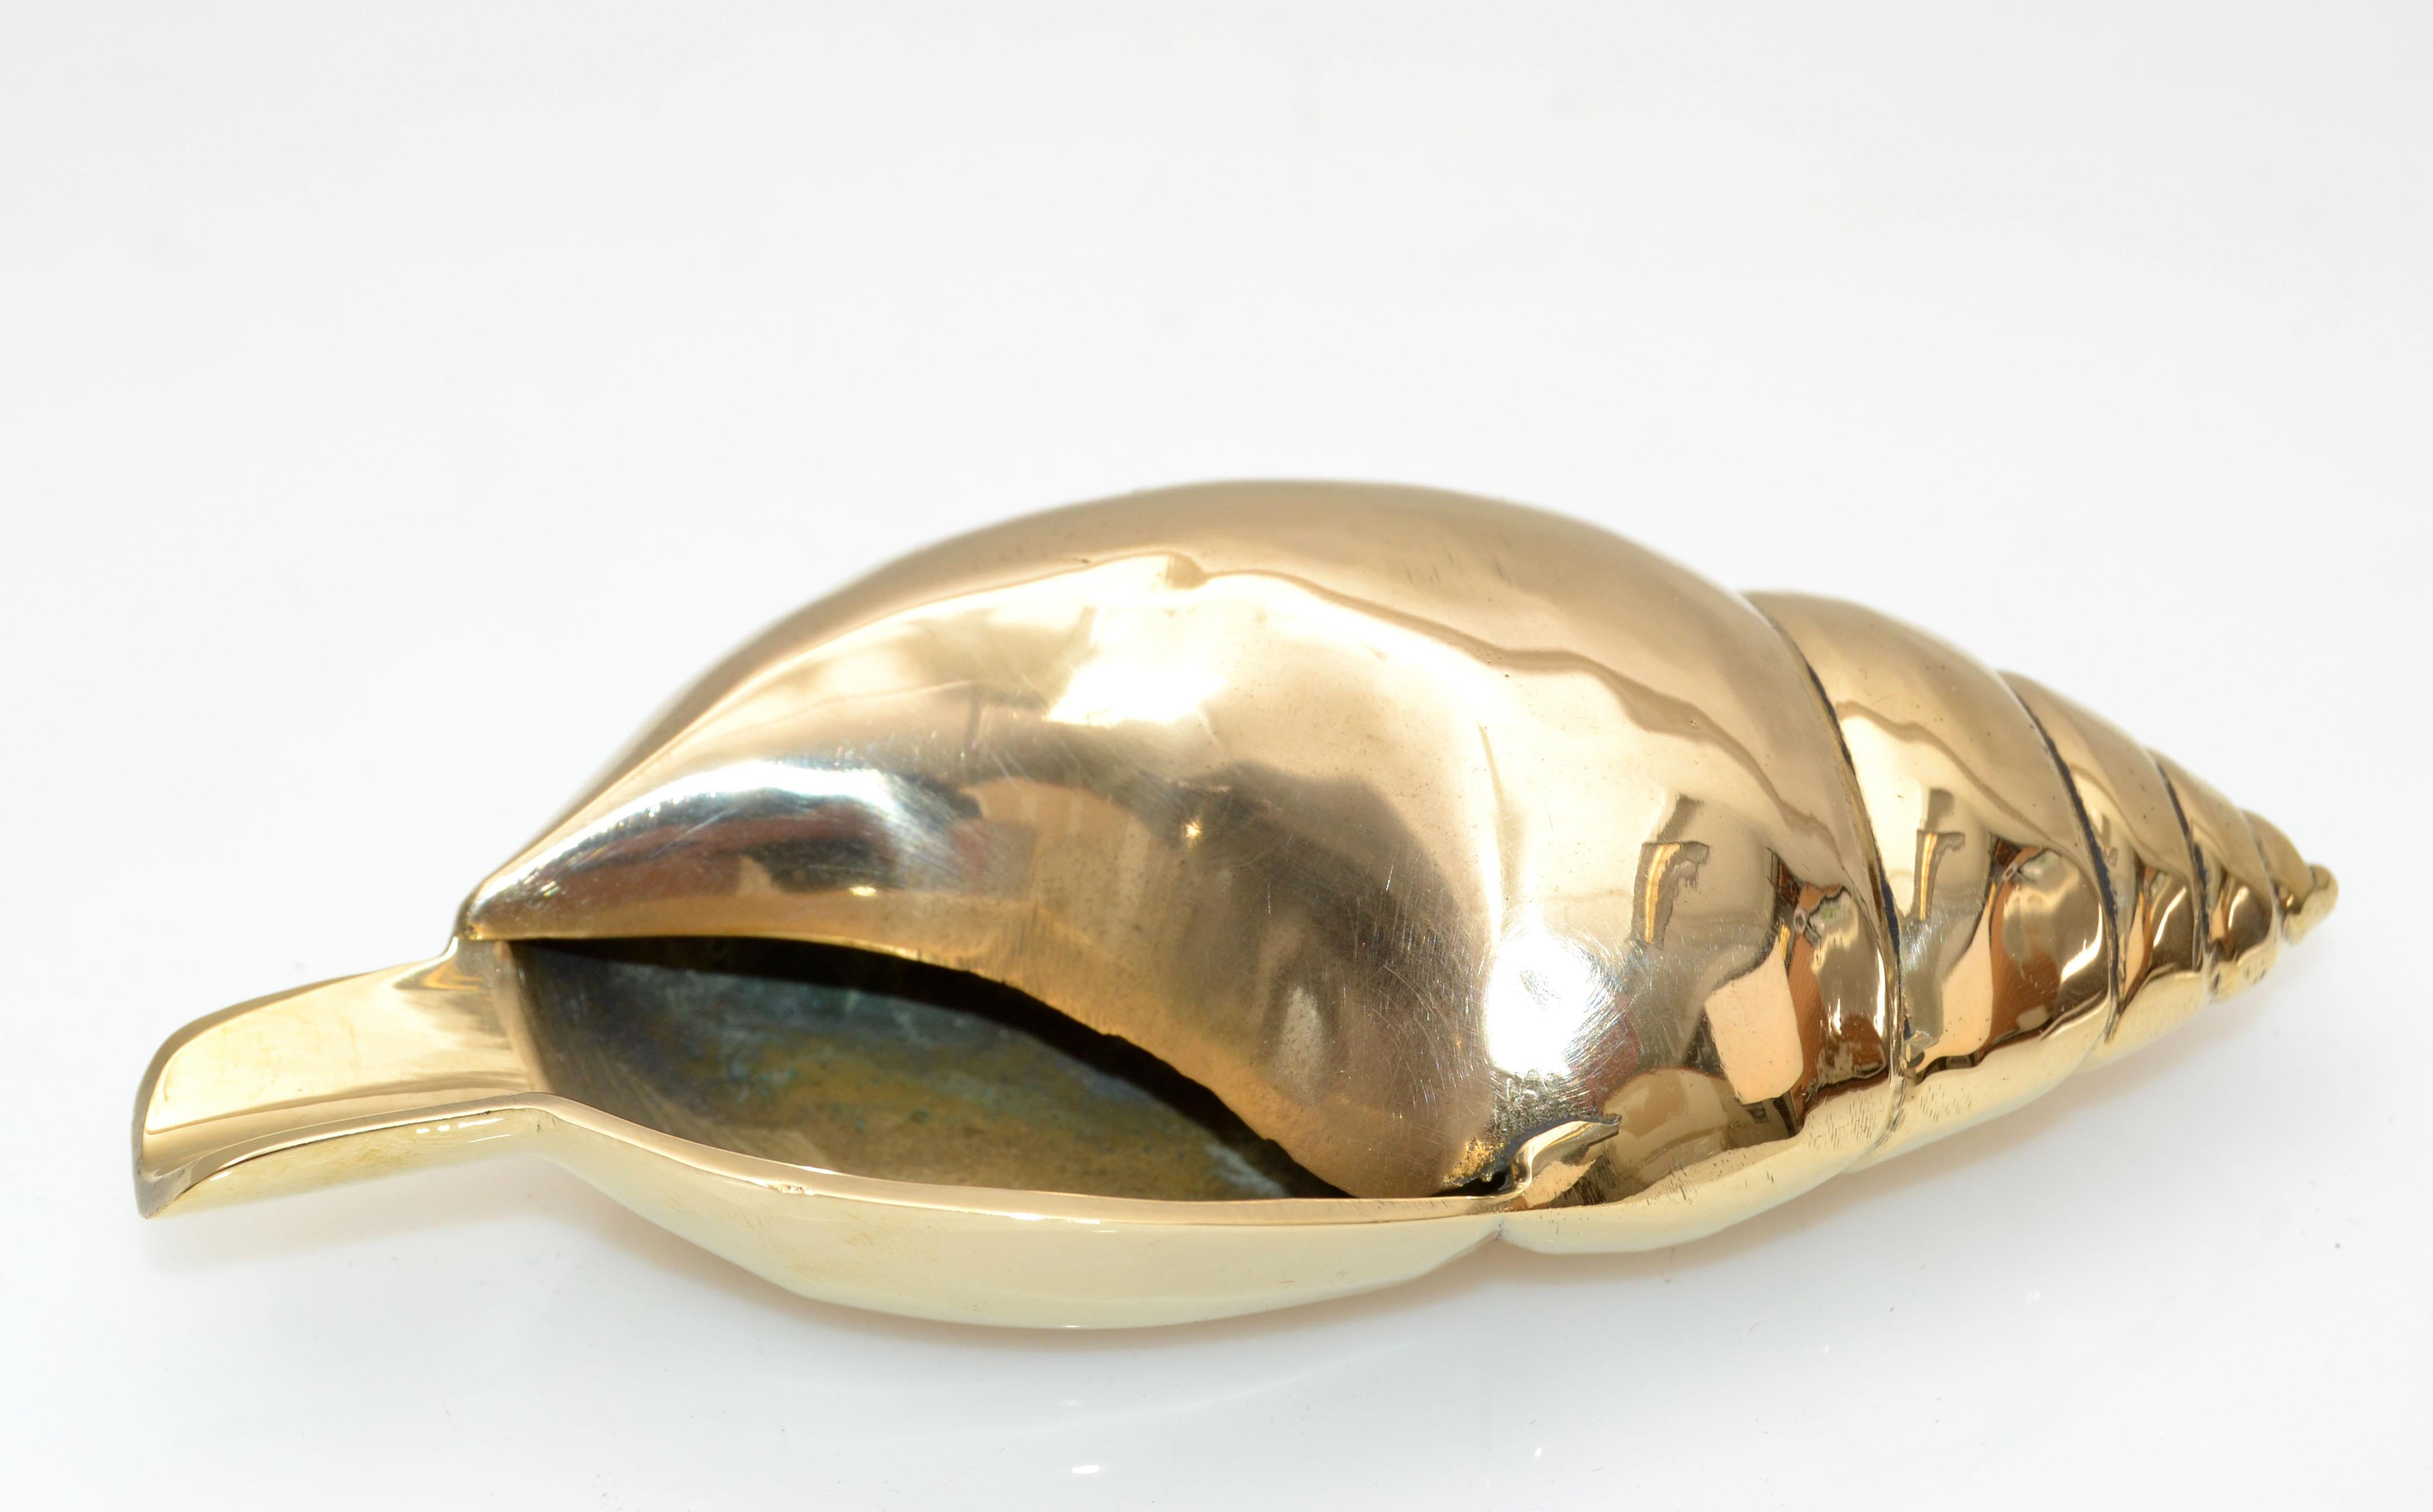 Nautical Polished Brass Seashell Ashtray Sculpture Mid-Century Modern In Good Condition For Sale In Miami, FL